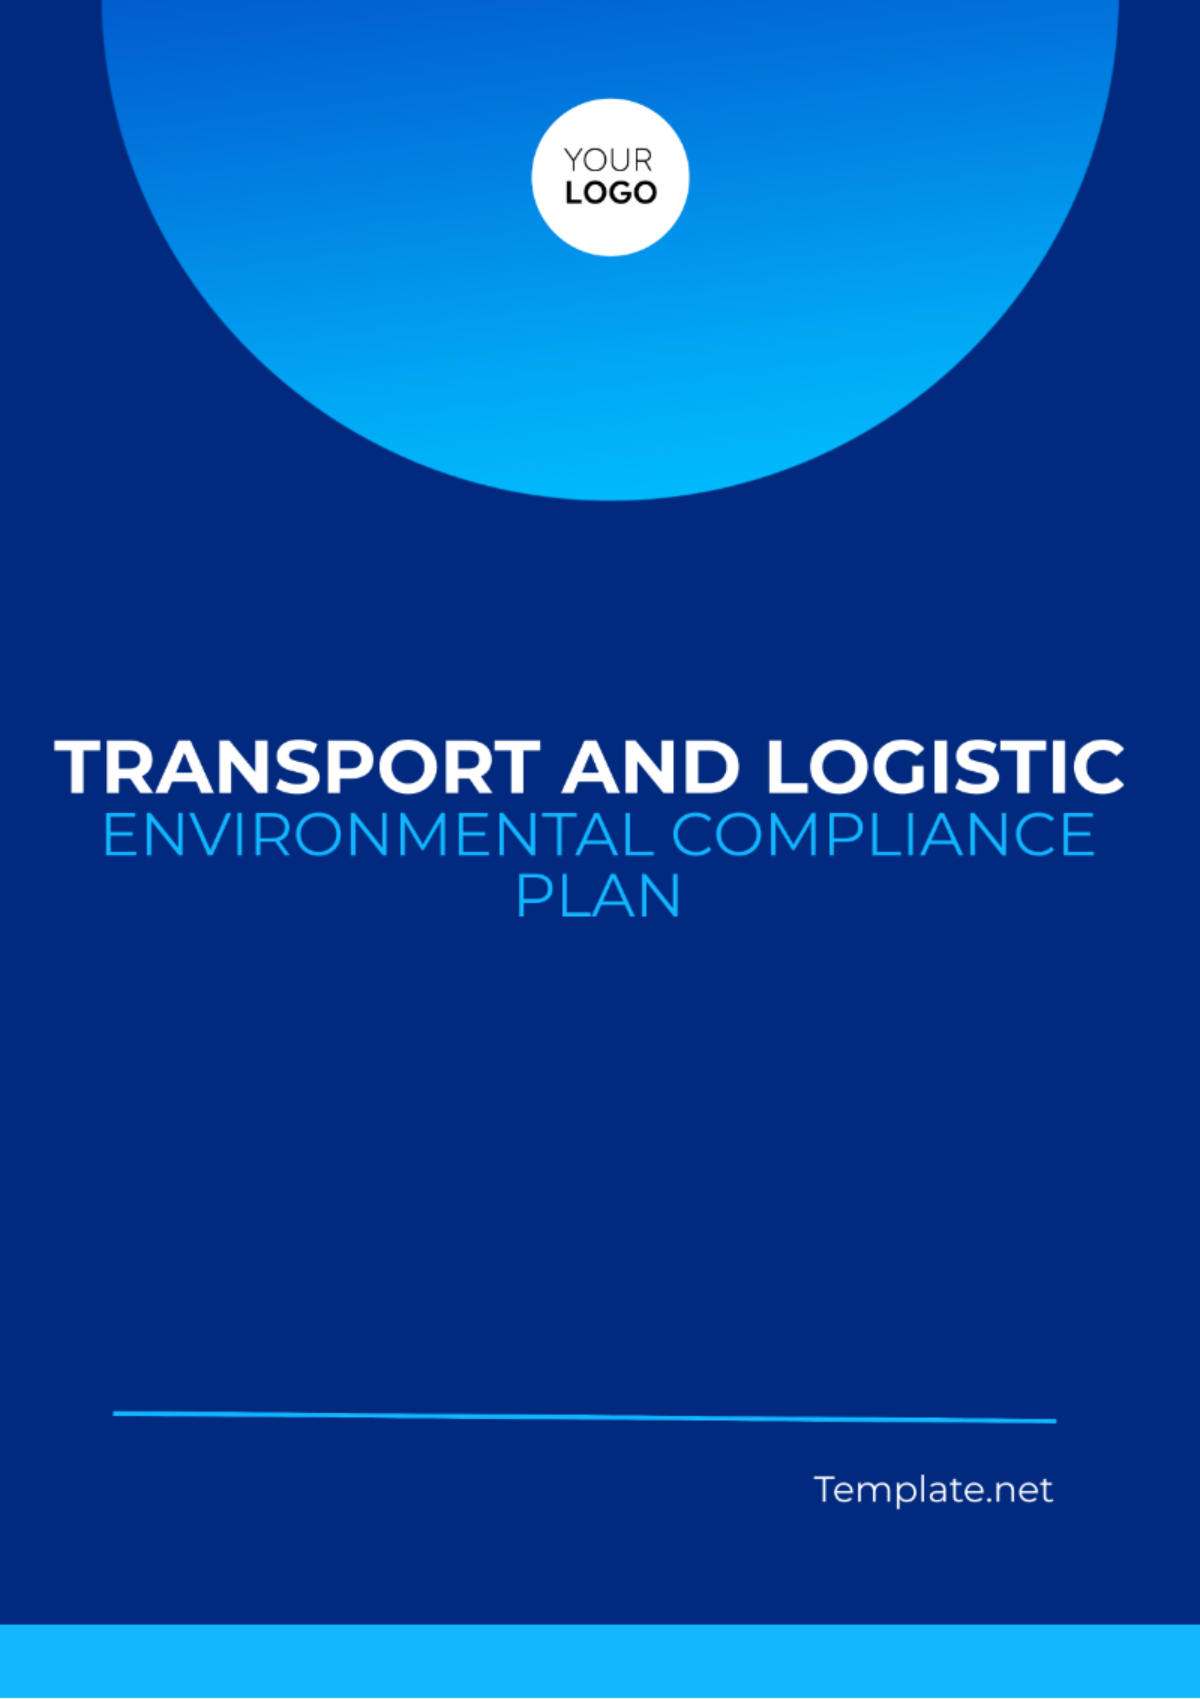 Free Transport And Logistics Environmental Compliance Plan Template